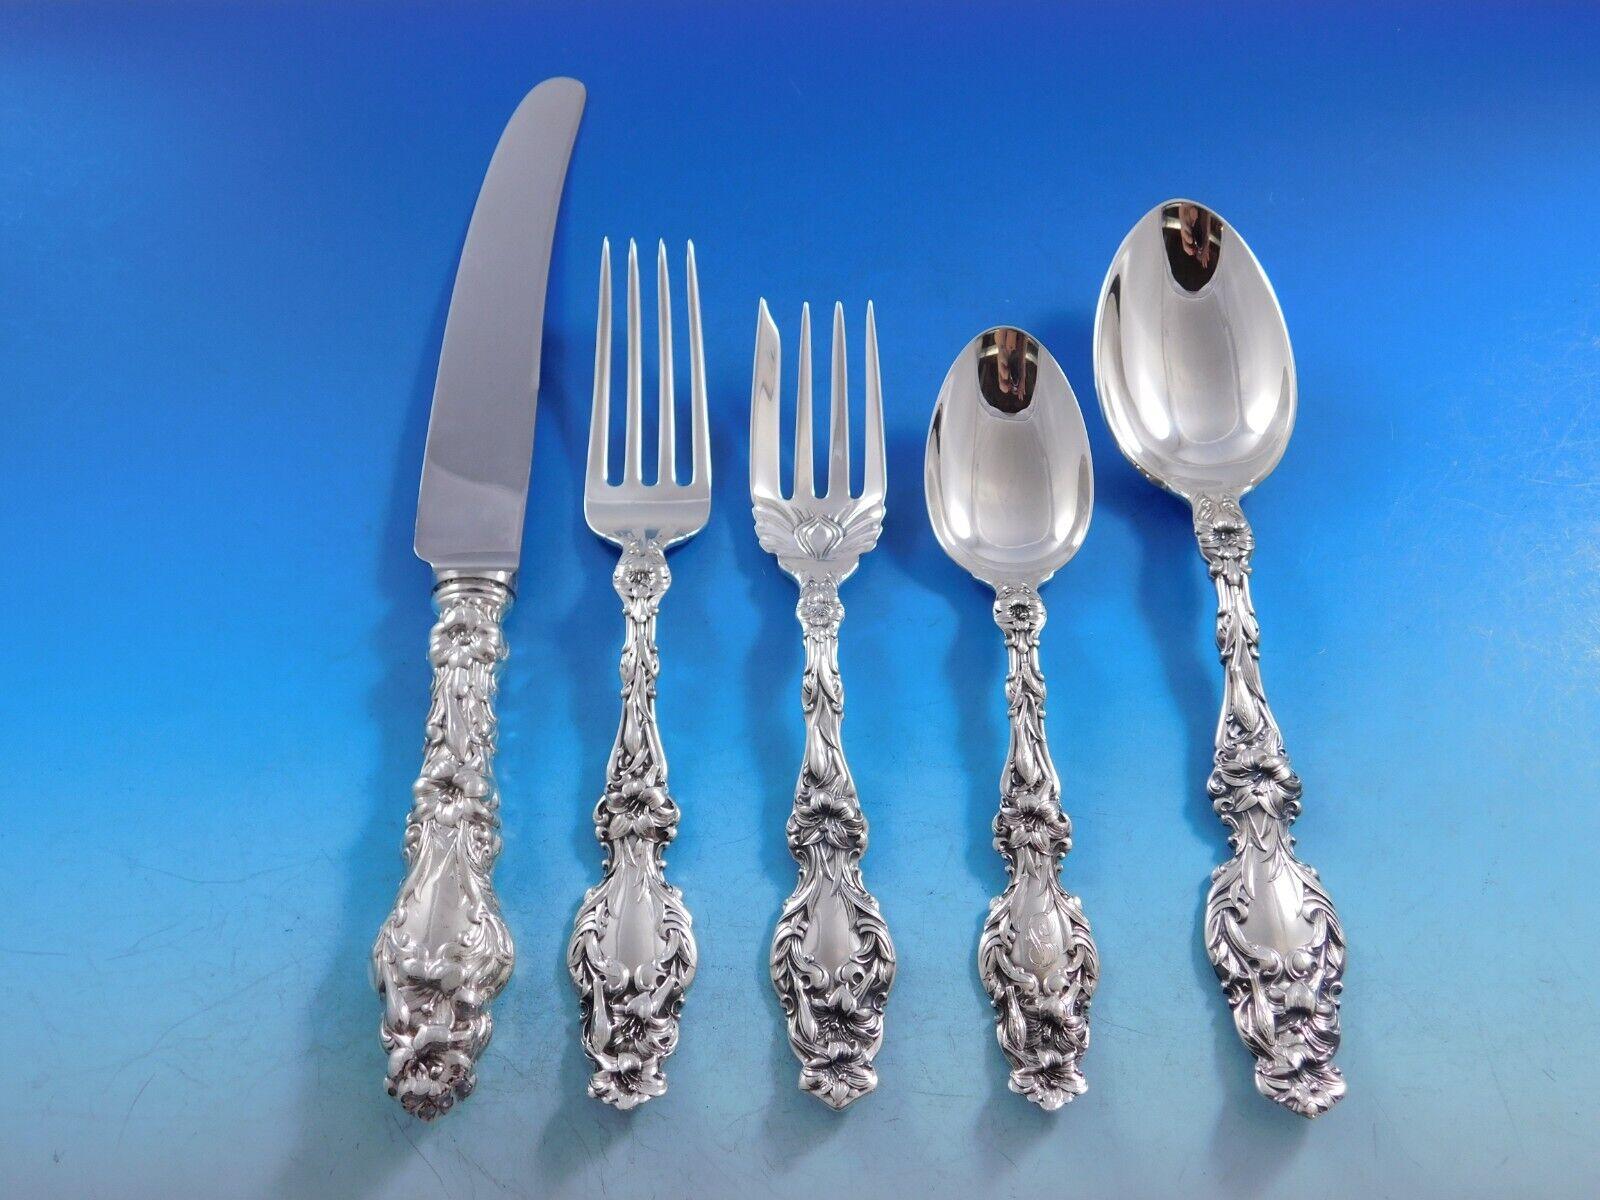 Beautiful Lily by Whiting Sterling Silver Flatware set - 62 pieces. This set includes:

12 Knives with French stainless blades, 9